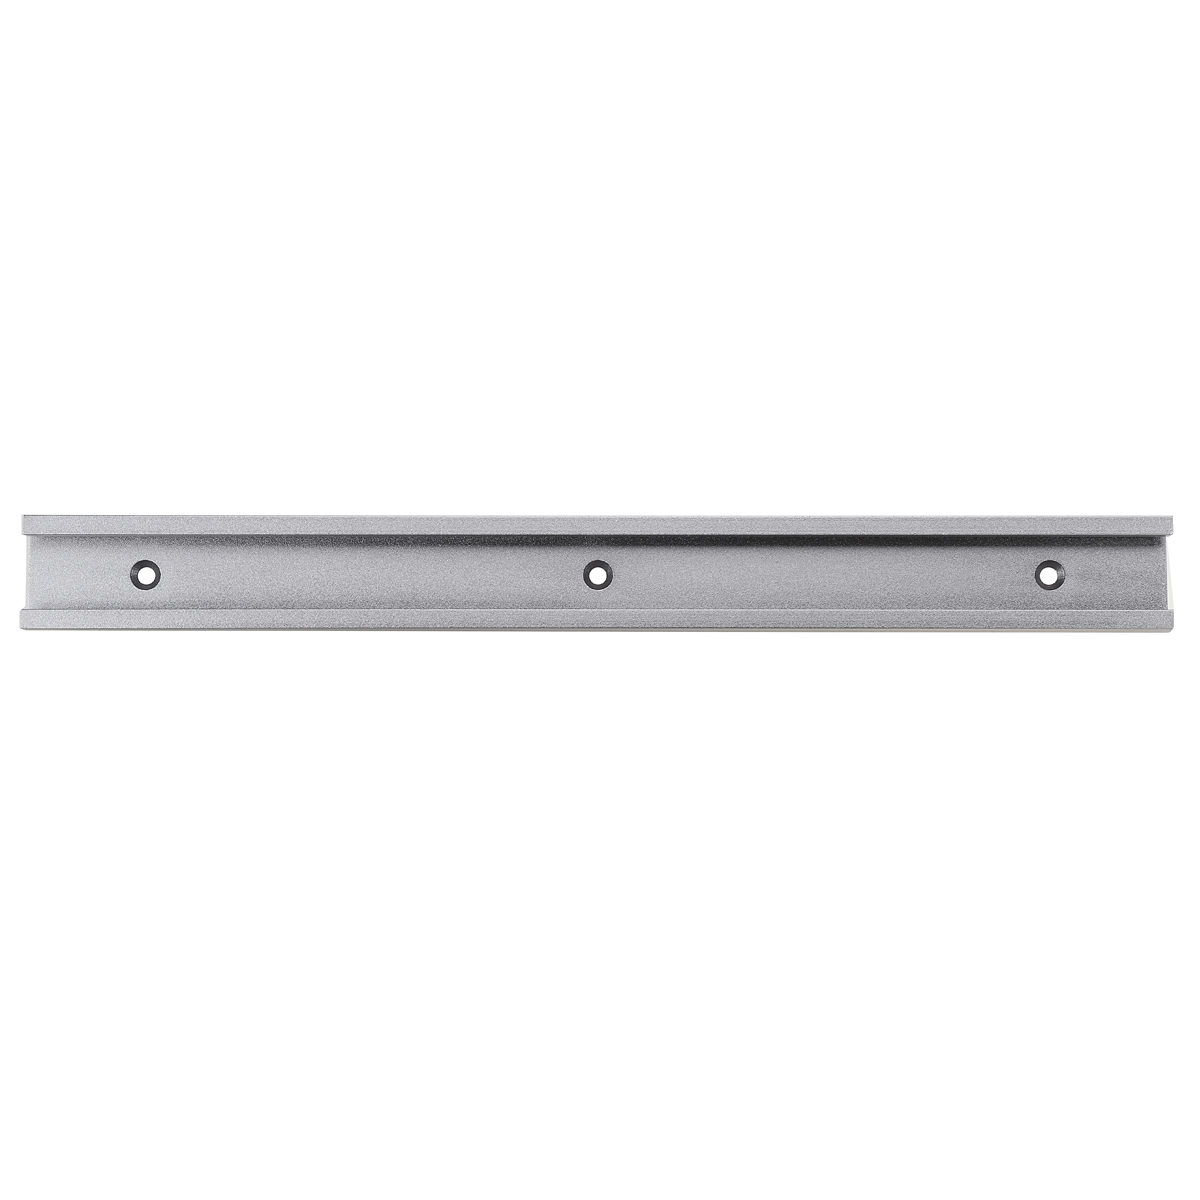 300mm-to-1220mm-Grey-T-Track-with-Predrilled-Mounting-Holes-30mm-x-128mm-Miter-Slot-for-Saw-Router-T-1810952-4